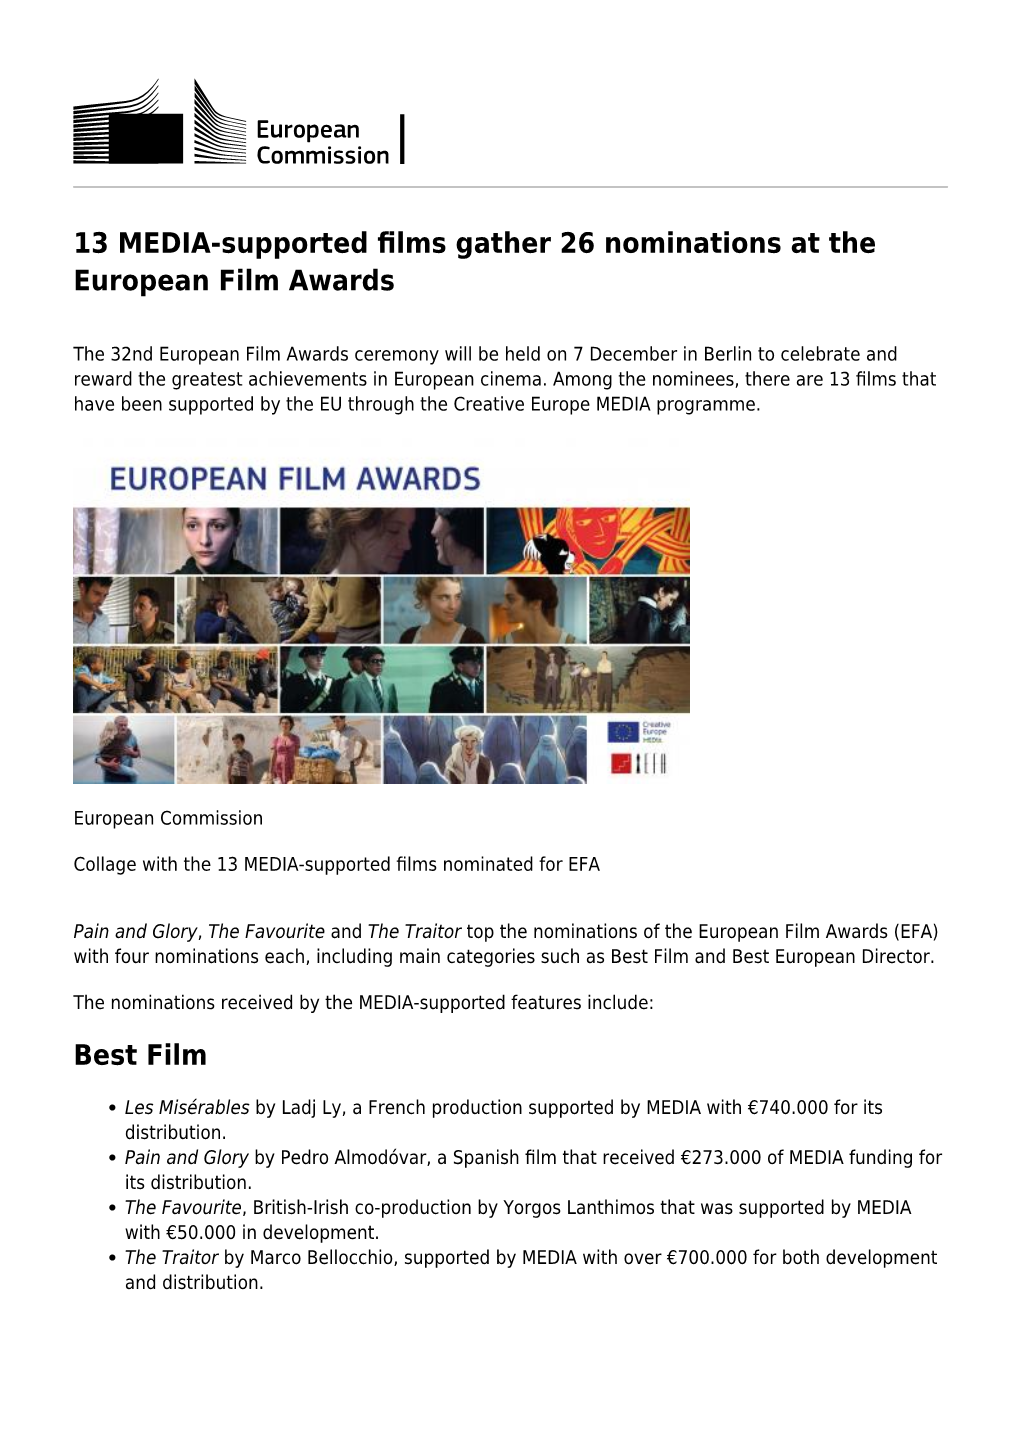 13 MEDIA-Supported Films Gather 26 Nominations at the European Film Awards